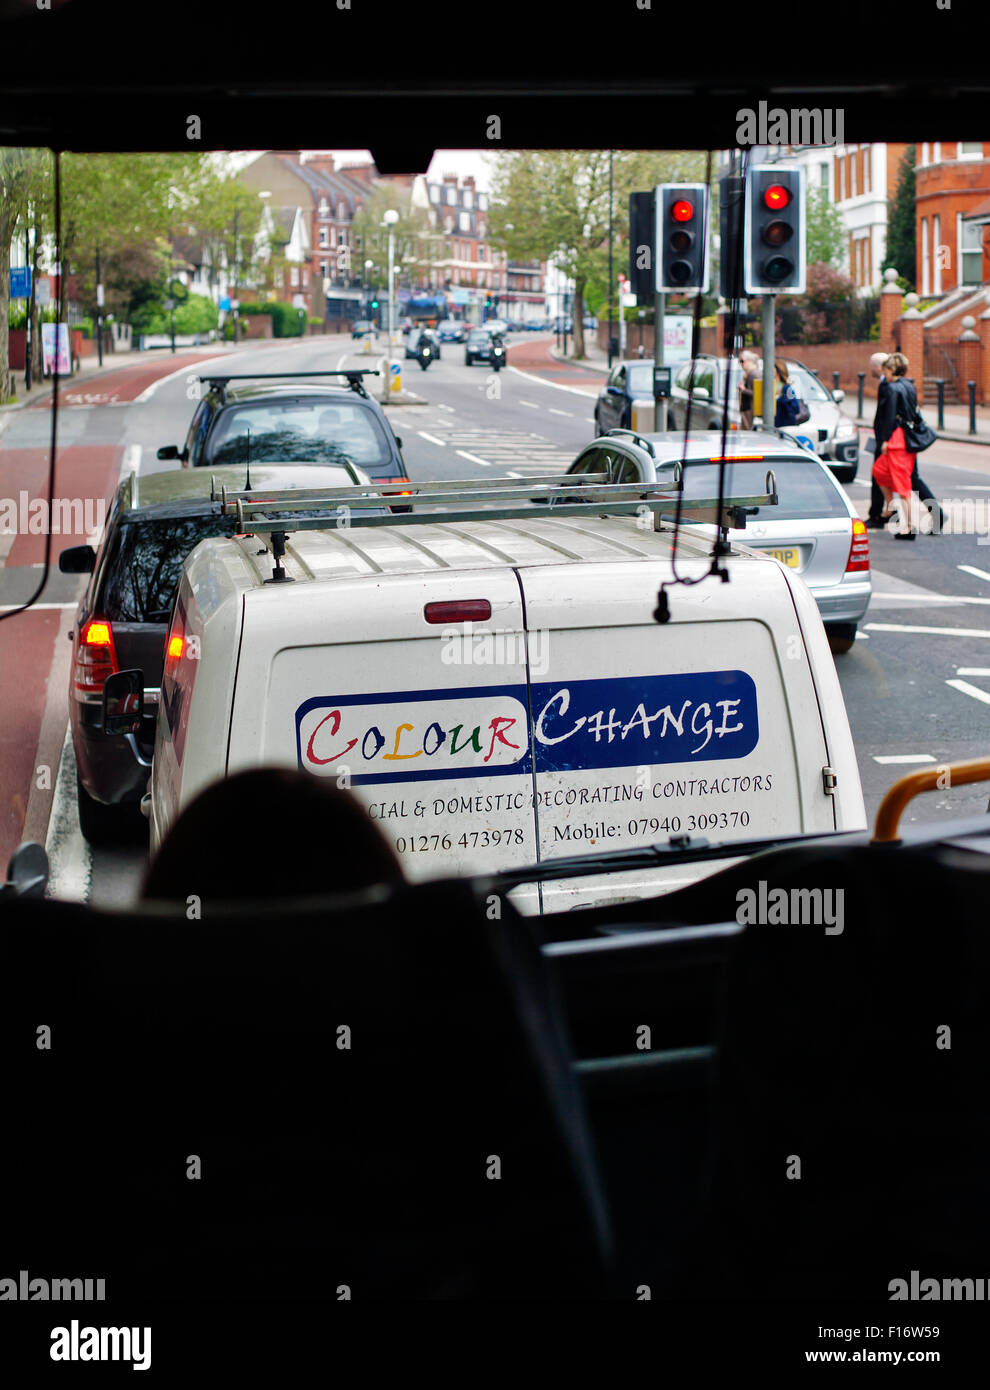 'Colour change' vehicle at red stop light, Finchley Road London, UK, Europe Stock Photo